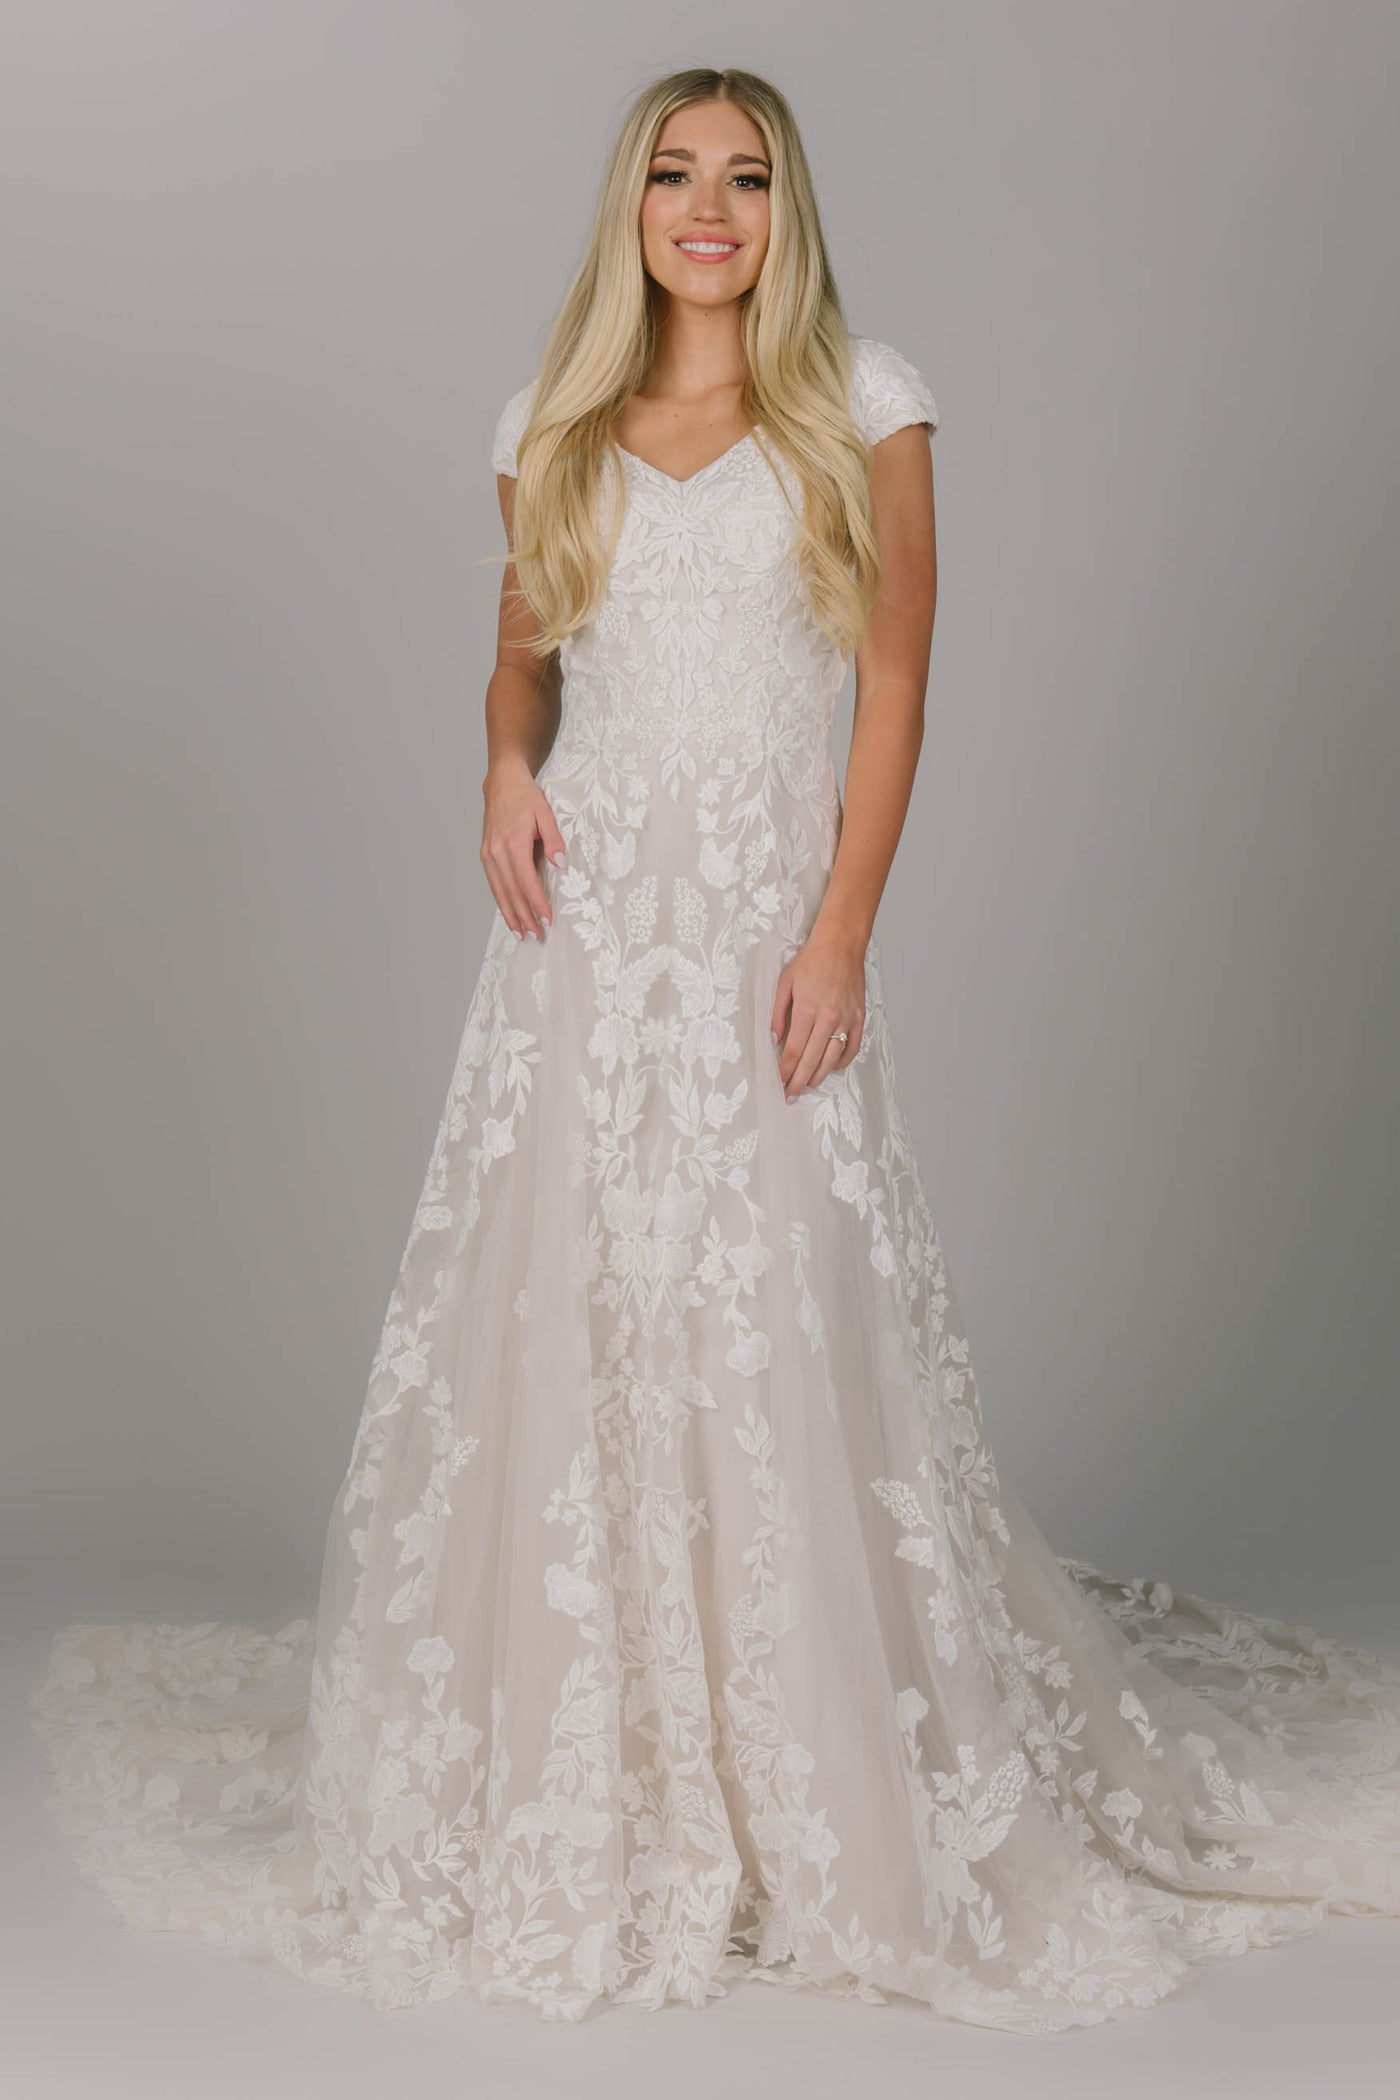 Modest wedding dress featuring an a-line fit and v-neckline. It has flower lace all over the dress but more on the top. Covered buttons go all the way down the back of the dress.  